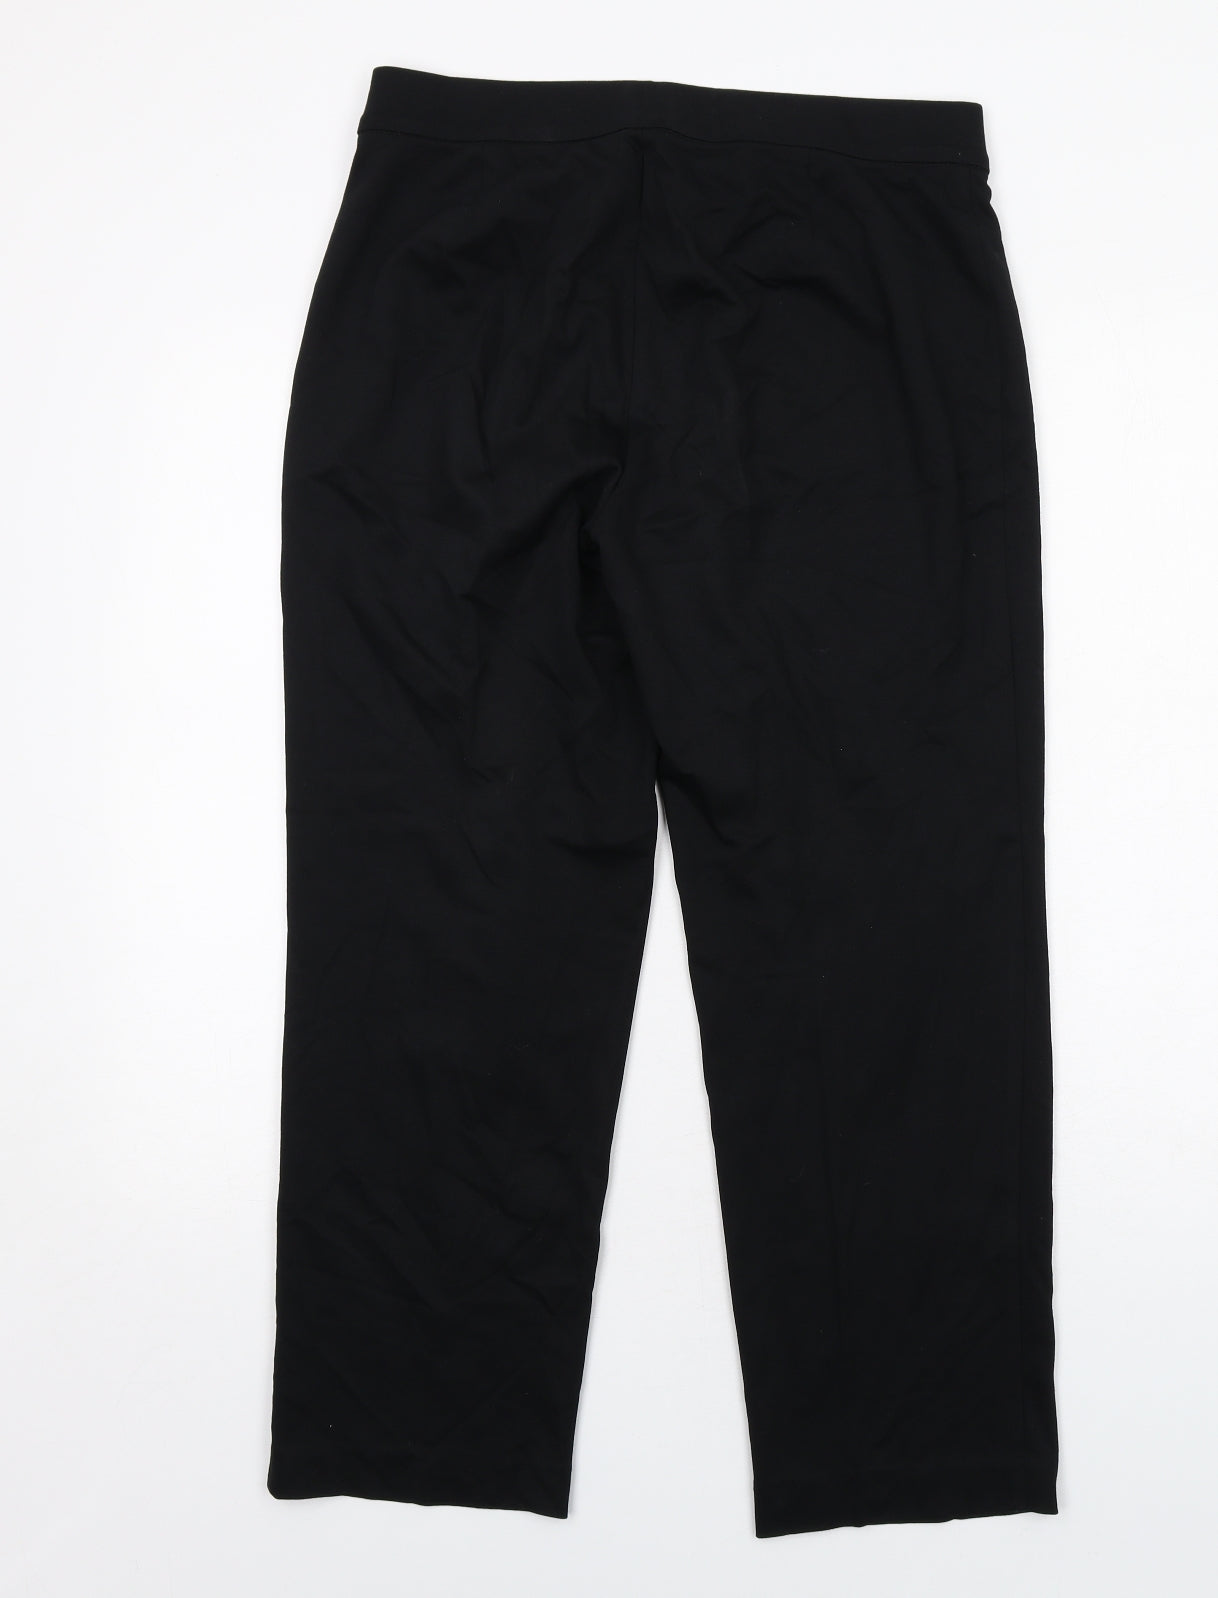 Marks and Spencer Womens Black Viscose Trousers Size 14 Regular